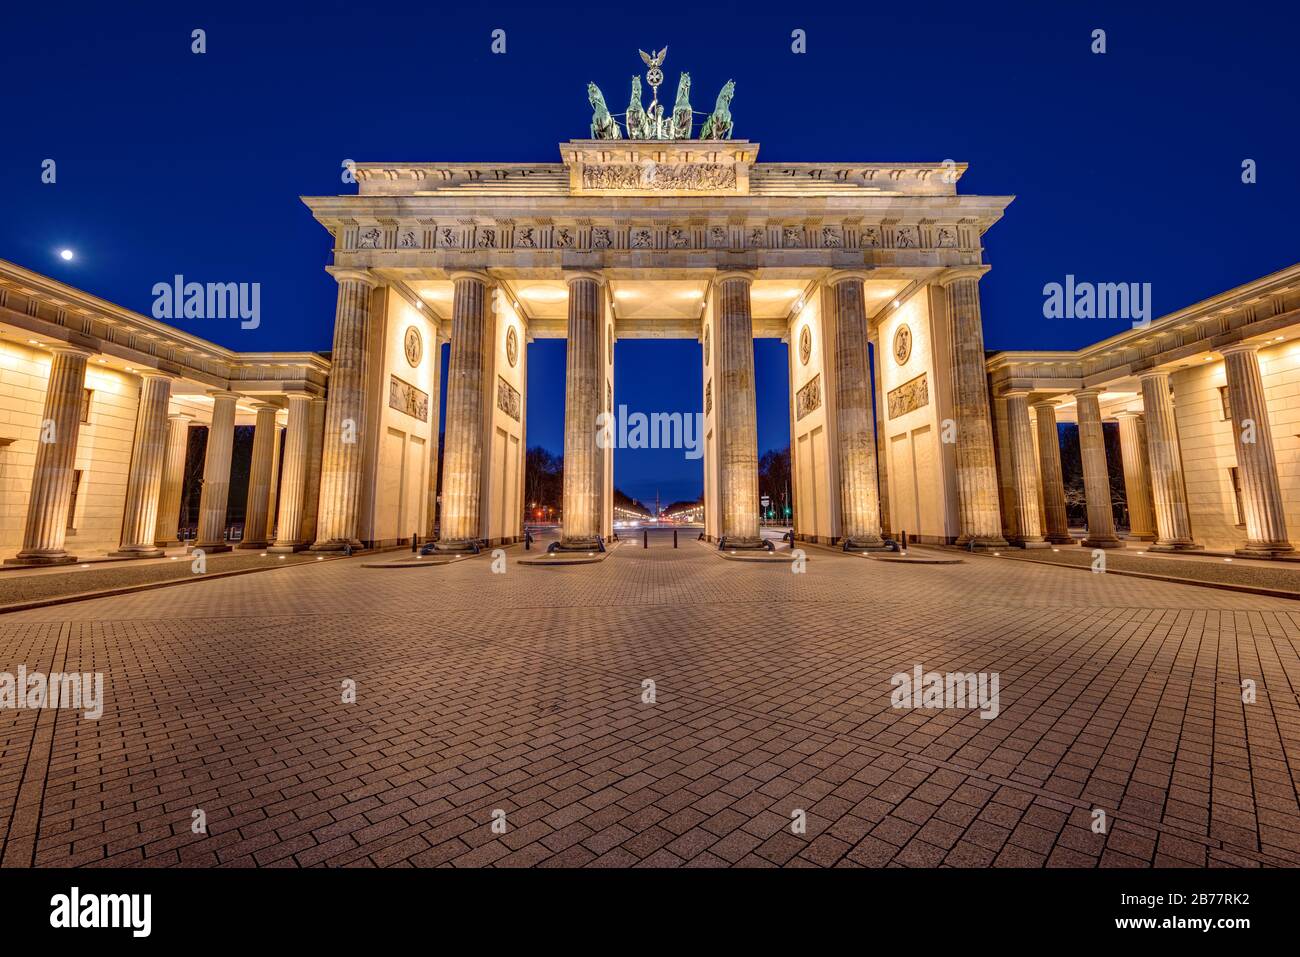 The famous Brandenburg Gate in Berlin at night Stock Photo